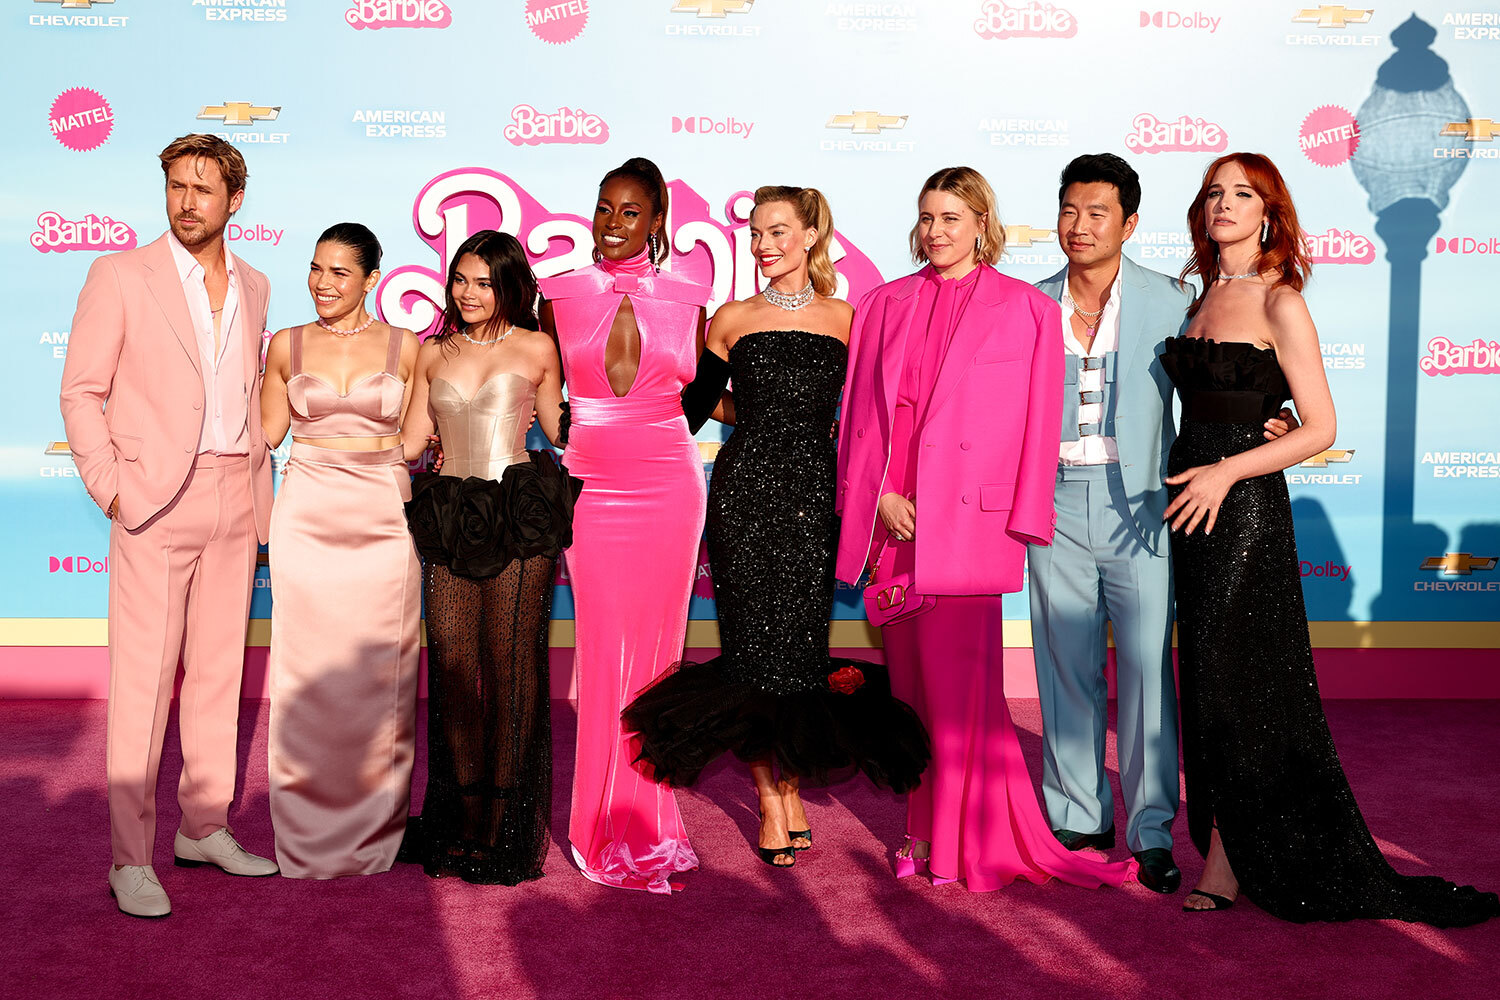 The cast of the Barbie movie at a premiere